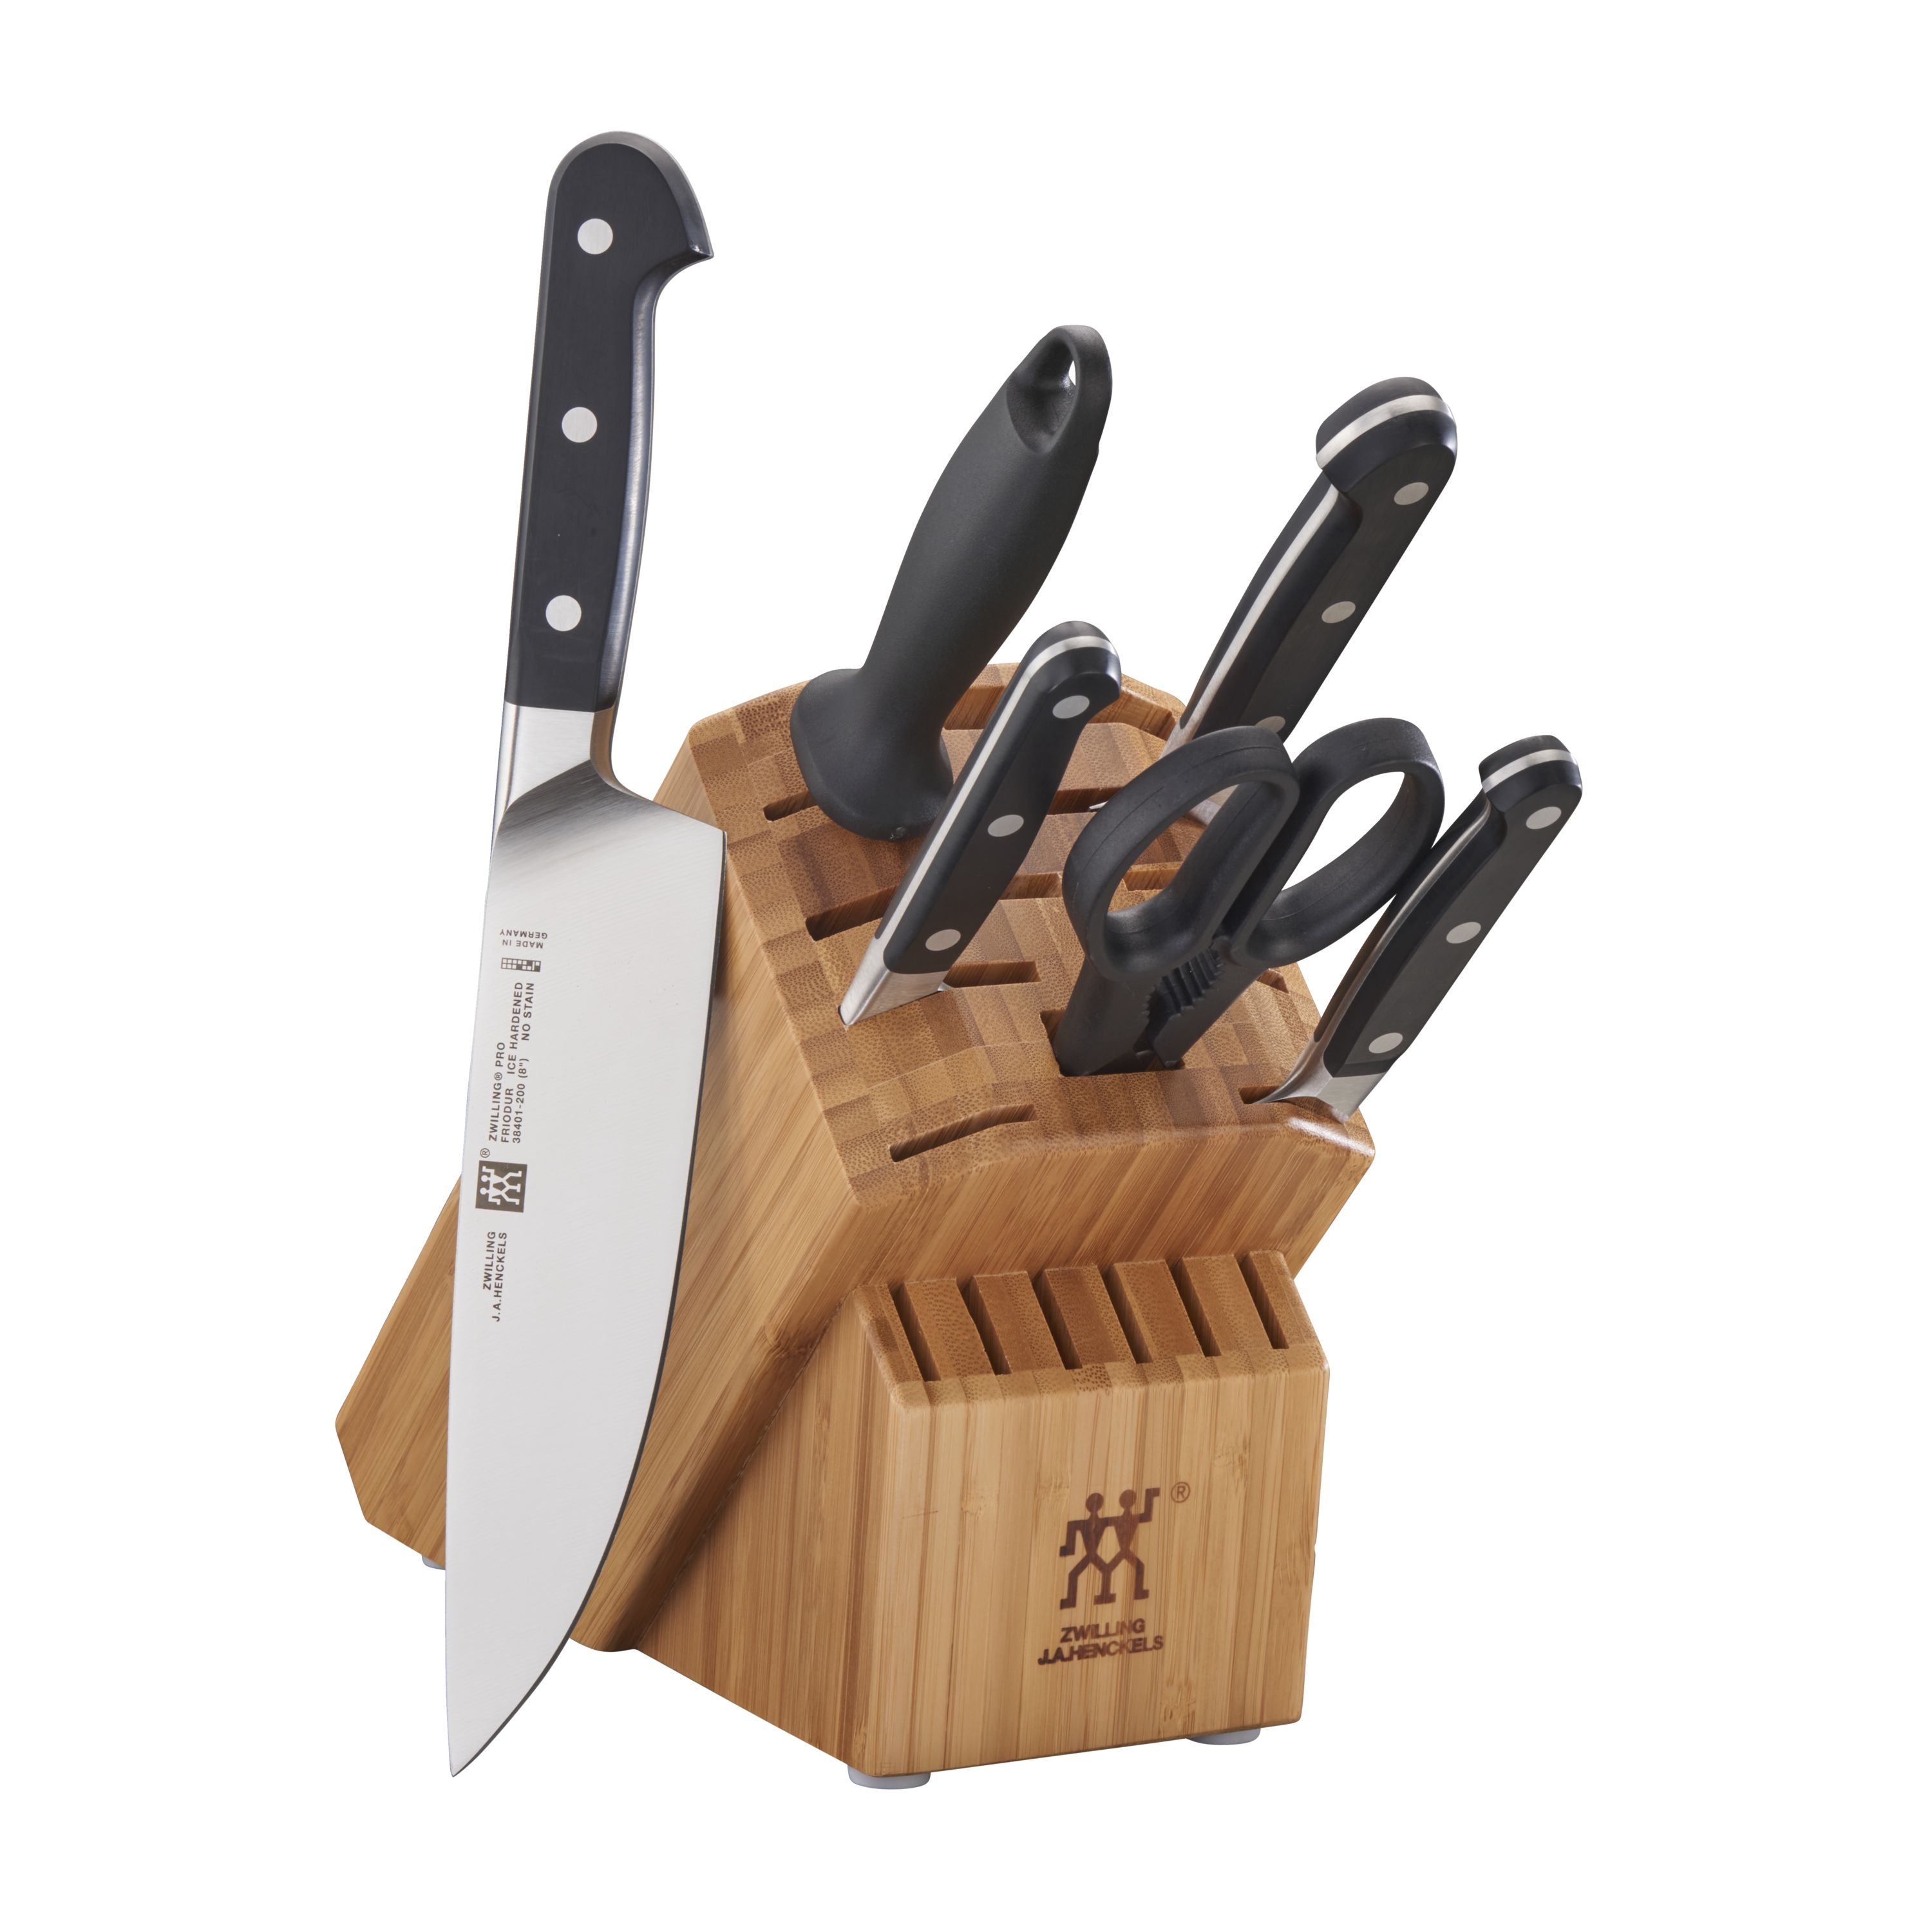 Stainless Damascus 7-Piece Block Set by Zwilling J.A. Henckels